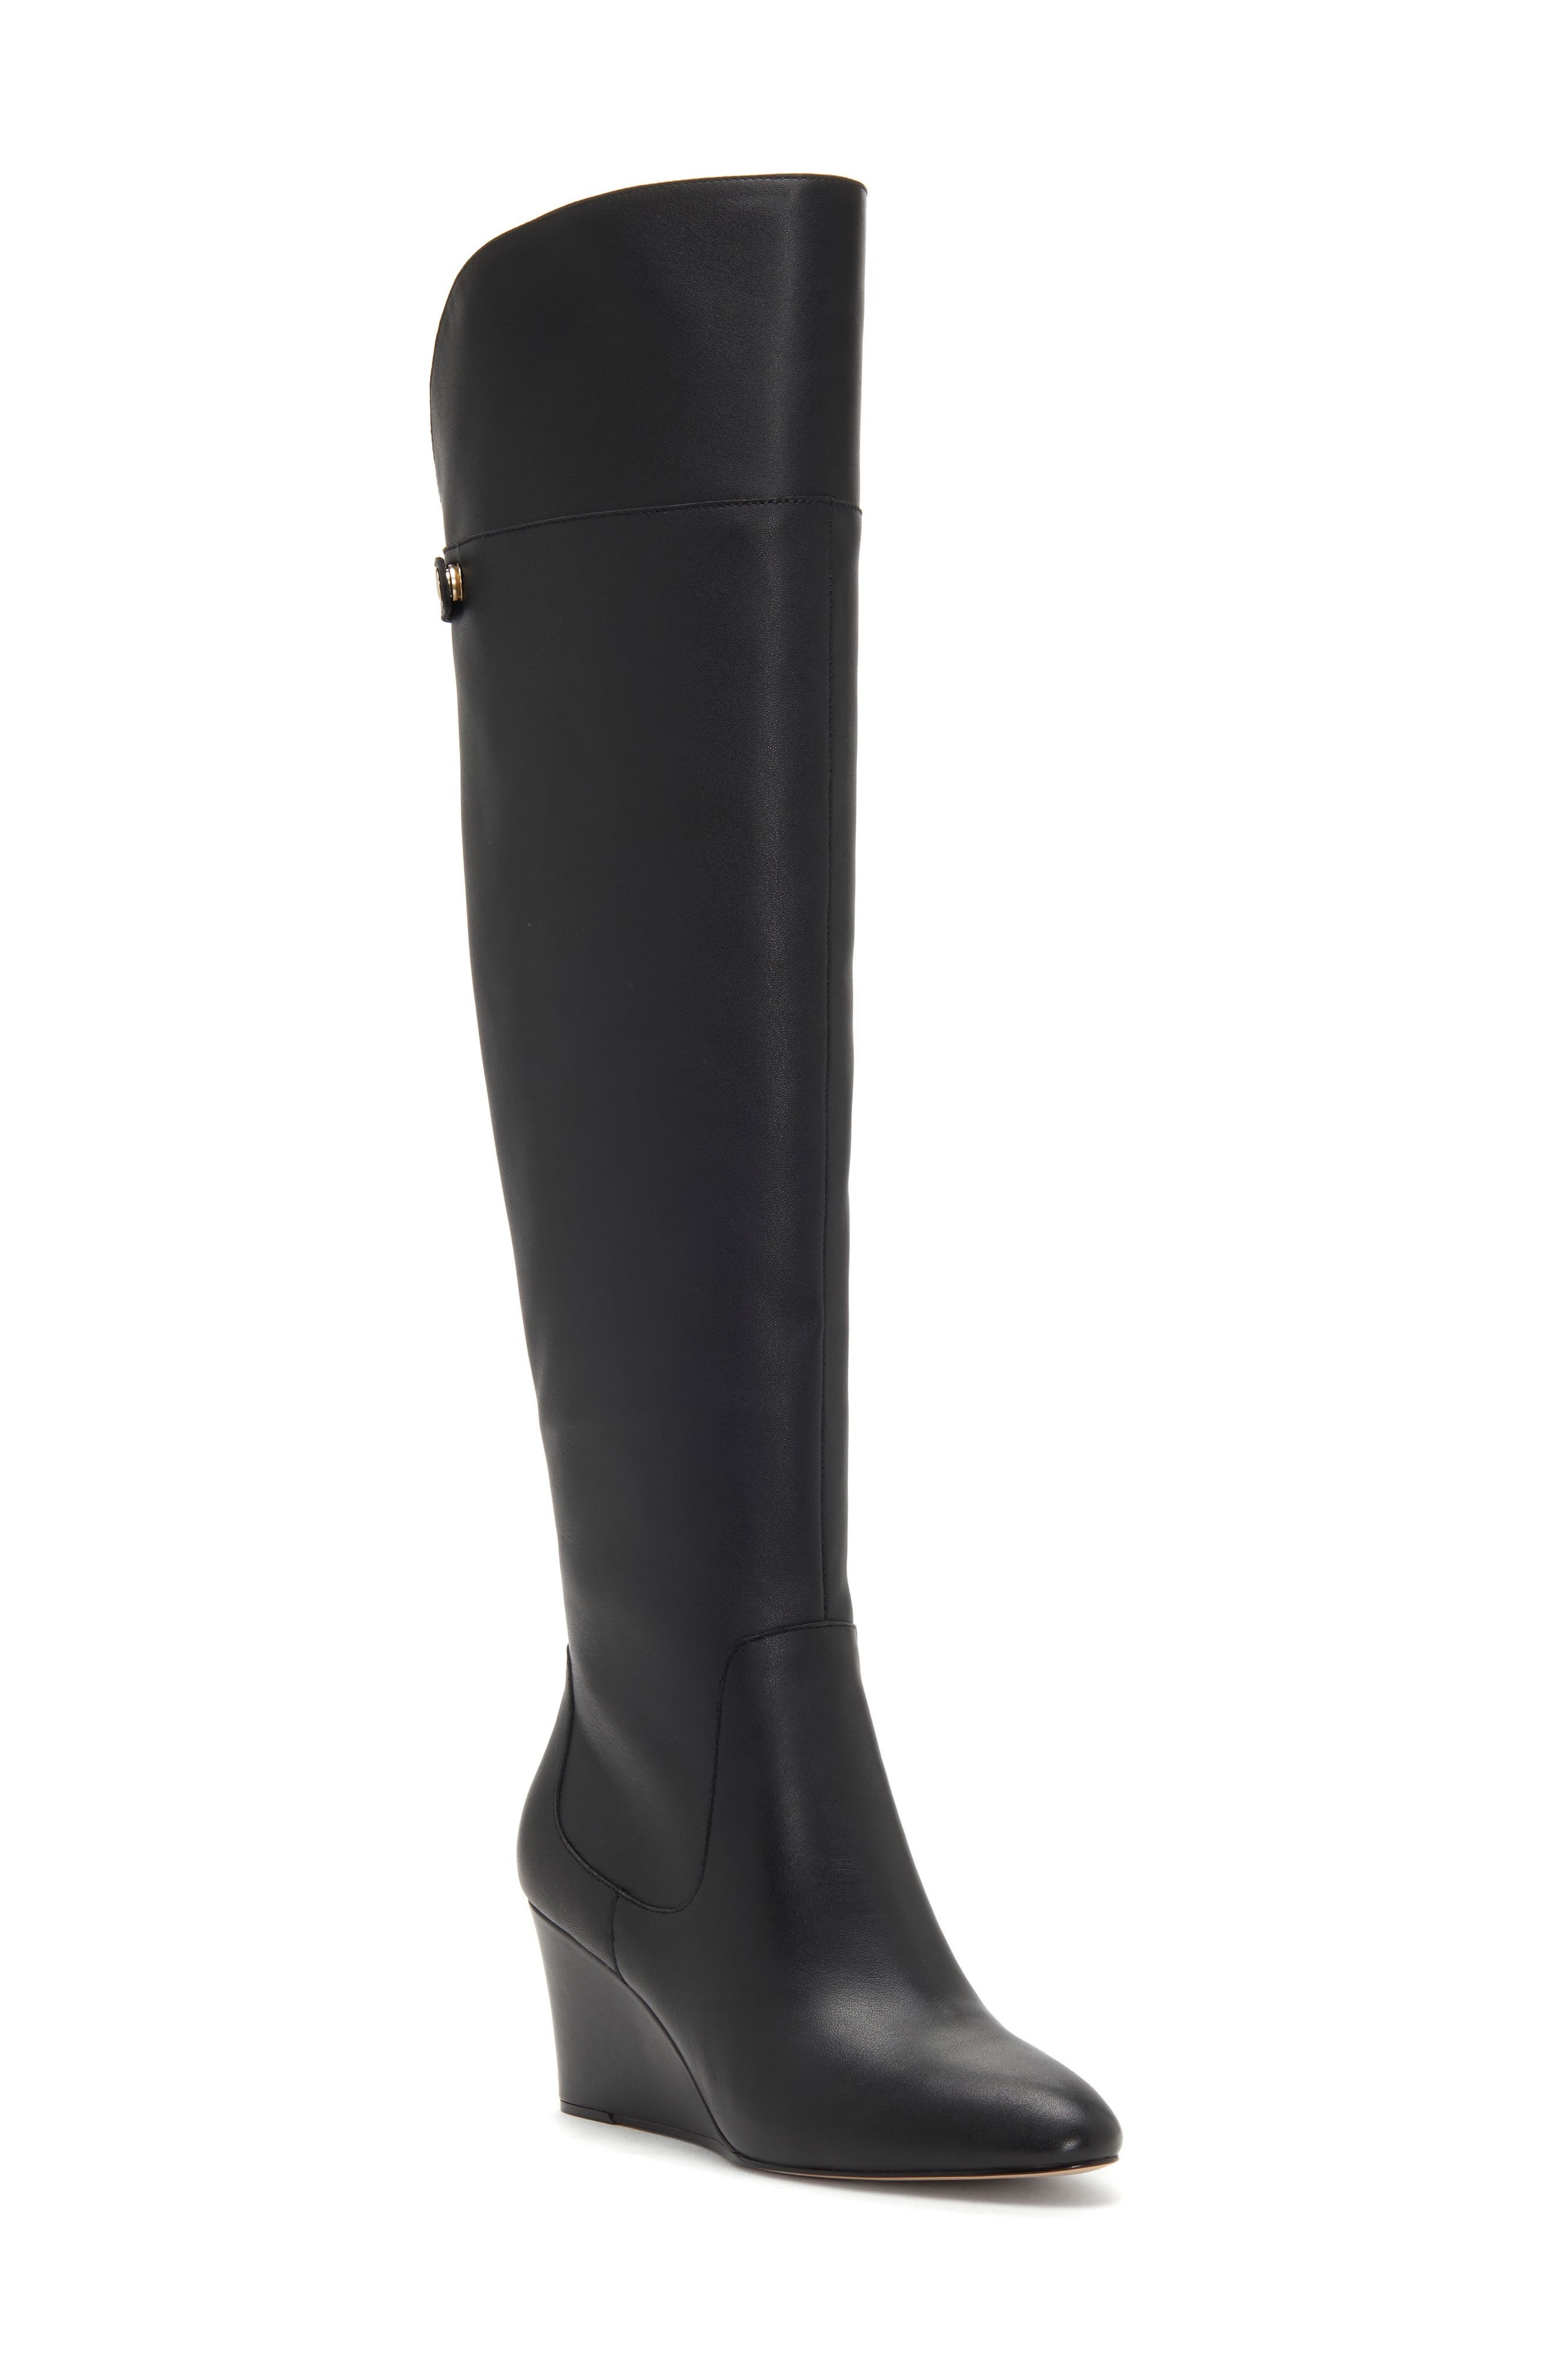 enzo angiolini meana over the knee boots